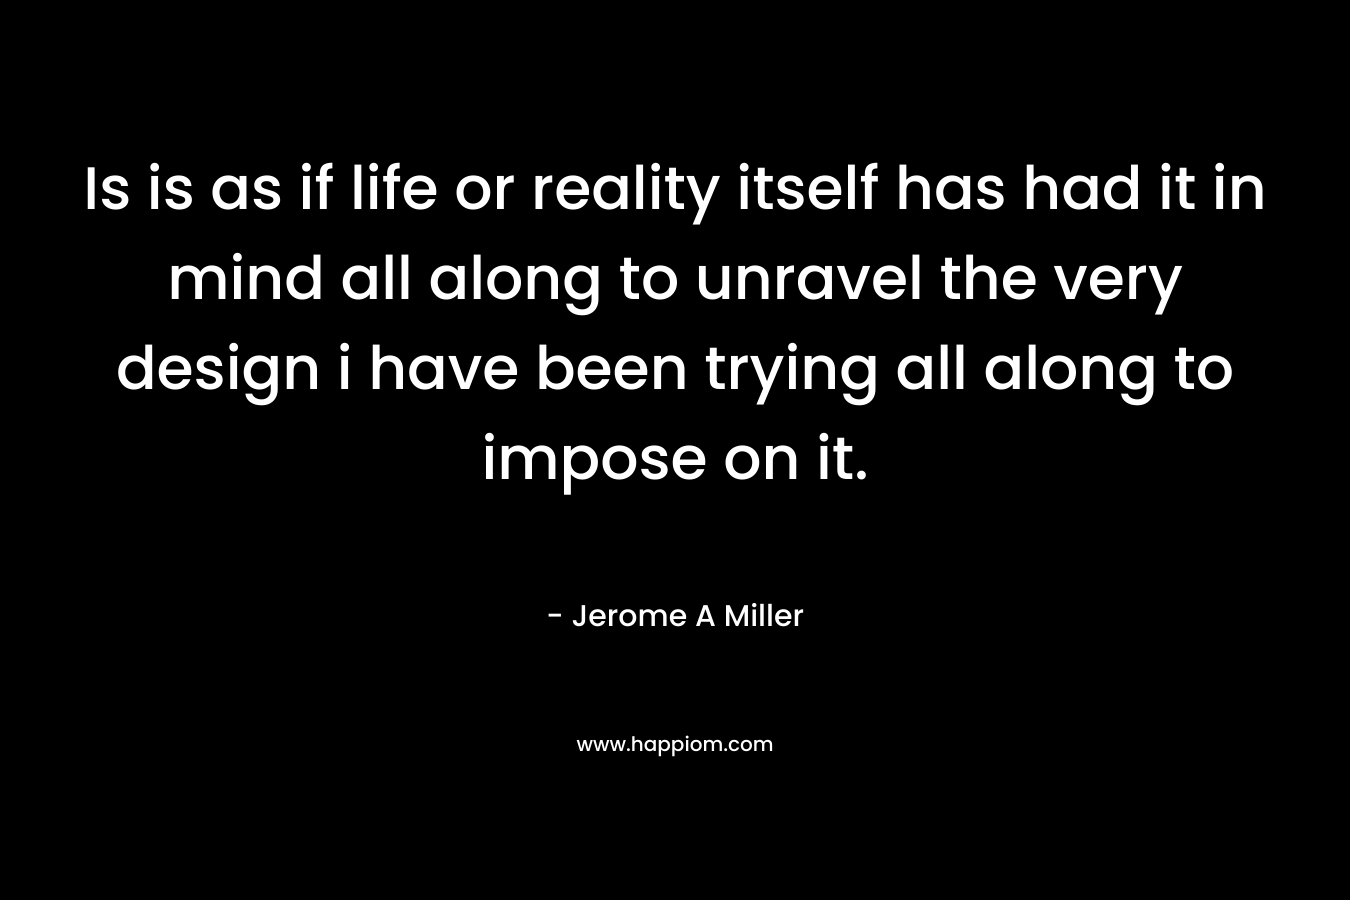 Is is as if life or reality itself has had it in mind all along to unravel the very design i have been trying all along to impose on it.